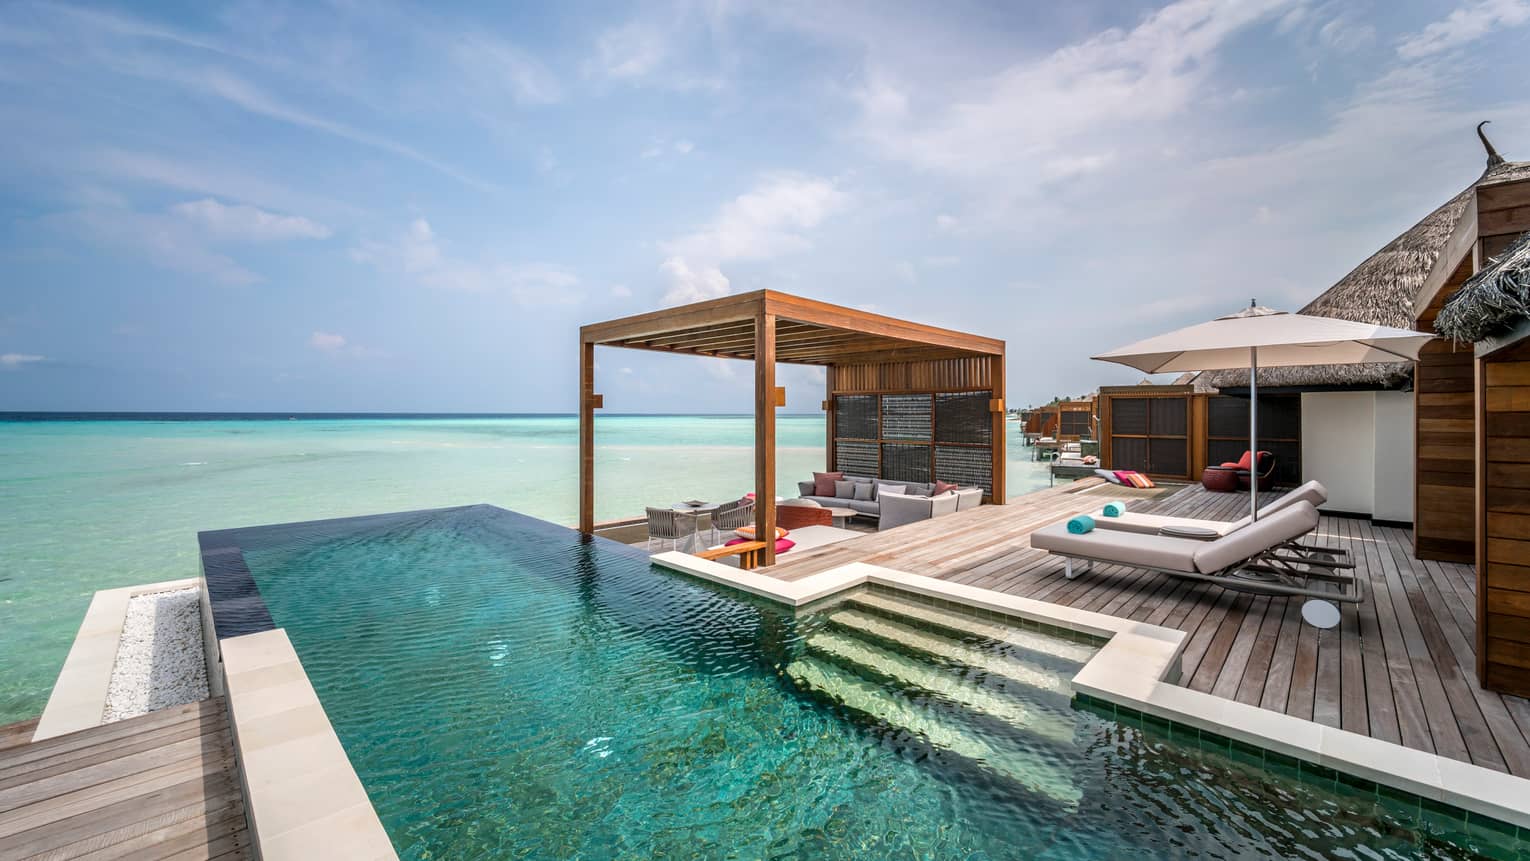 The two-bedroom water suite's extended deck with private pool and shaded lounge area